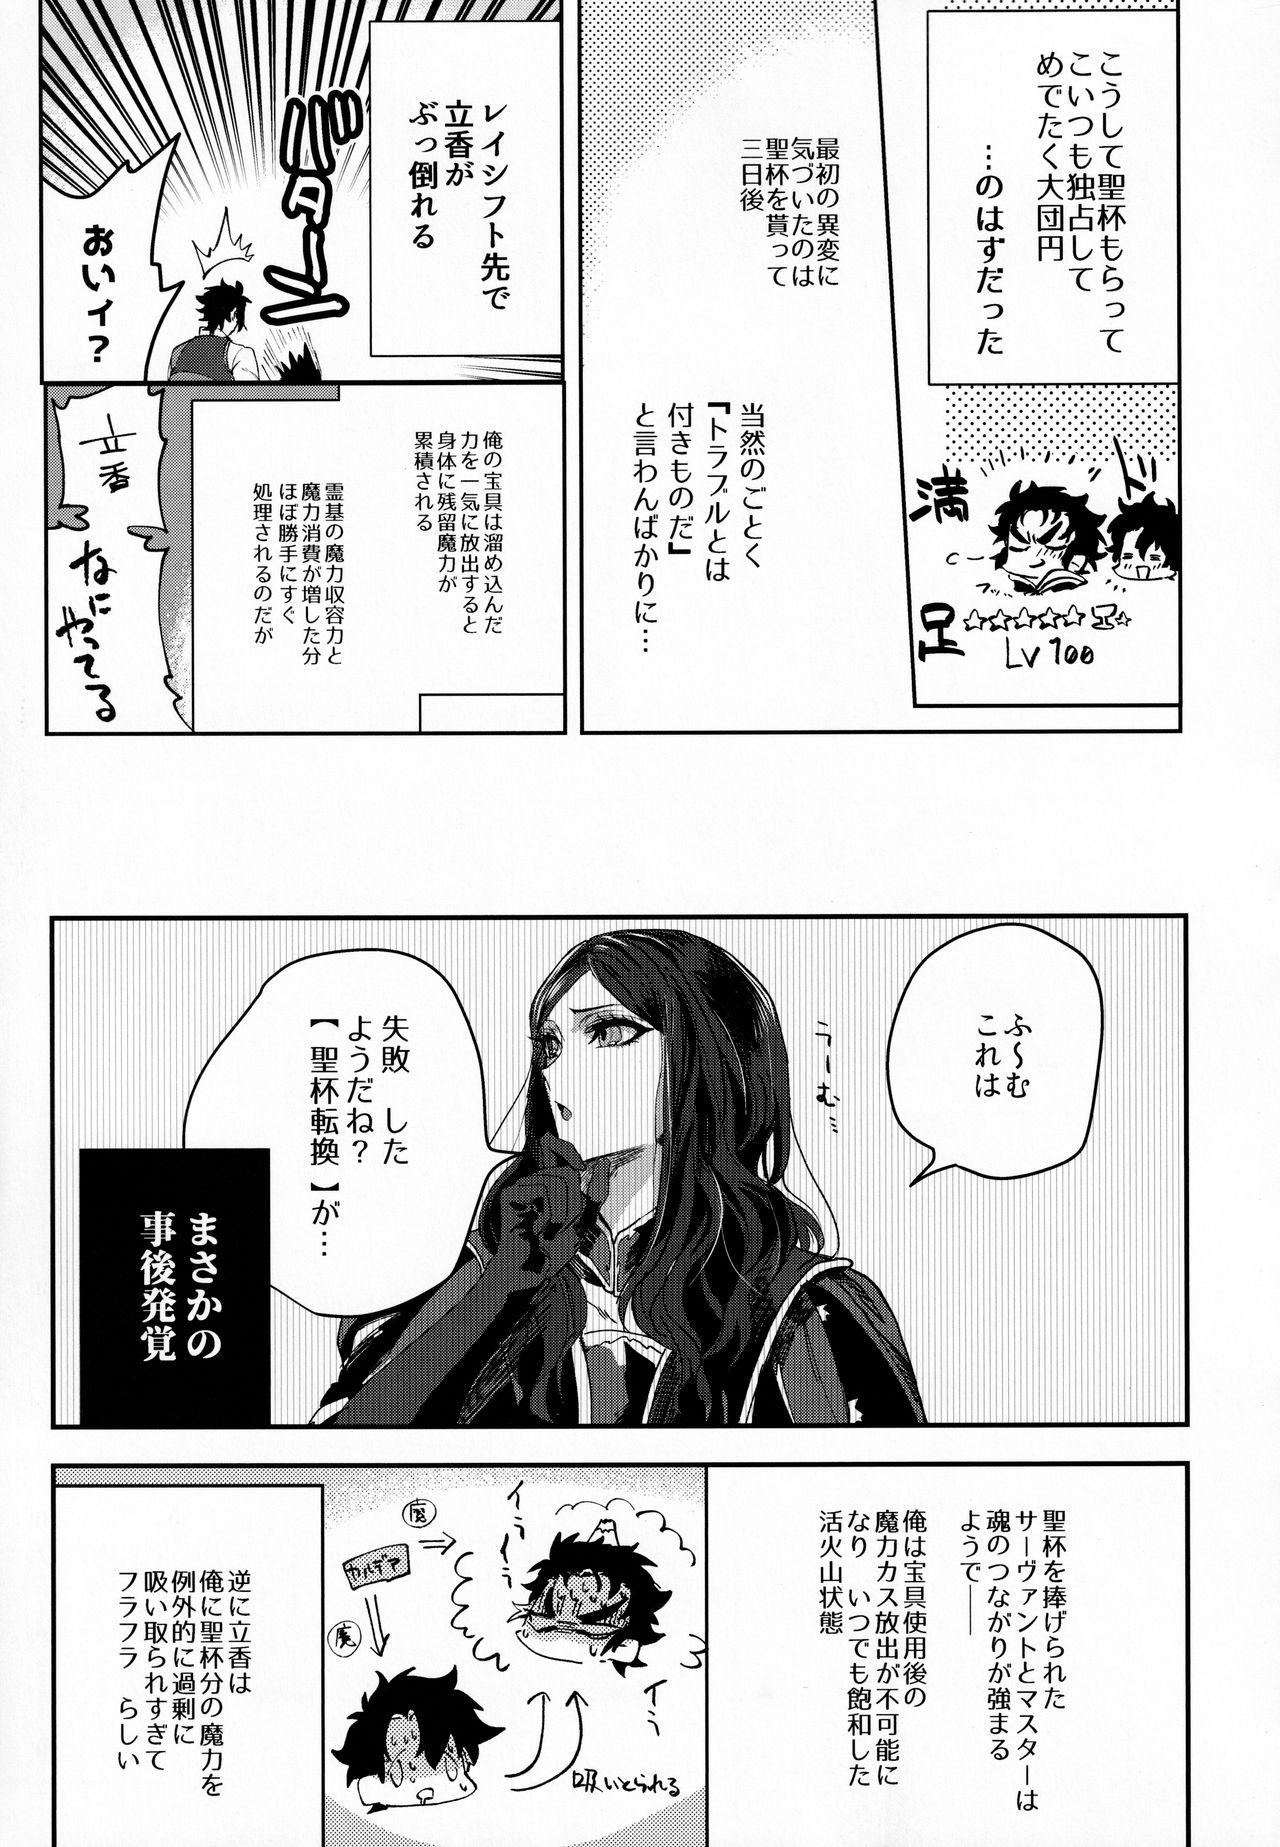 Big Dick 耽溺と熱 - Fate grand order Load - Page 12